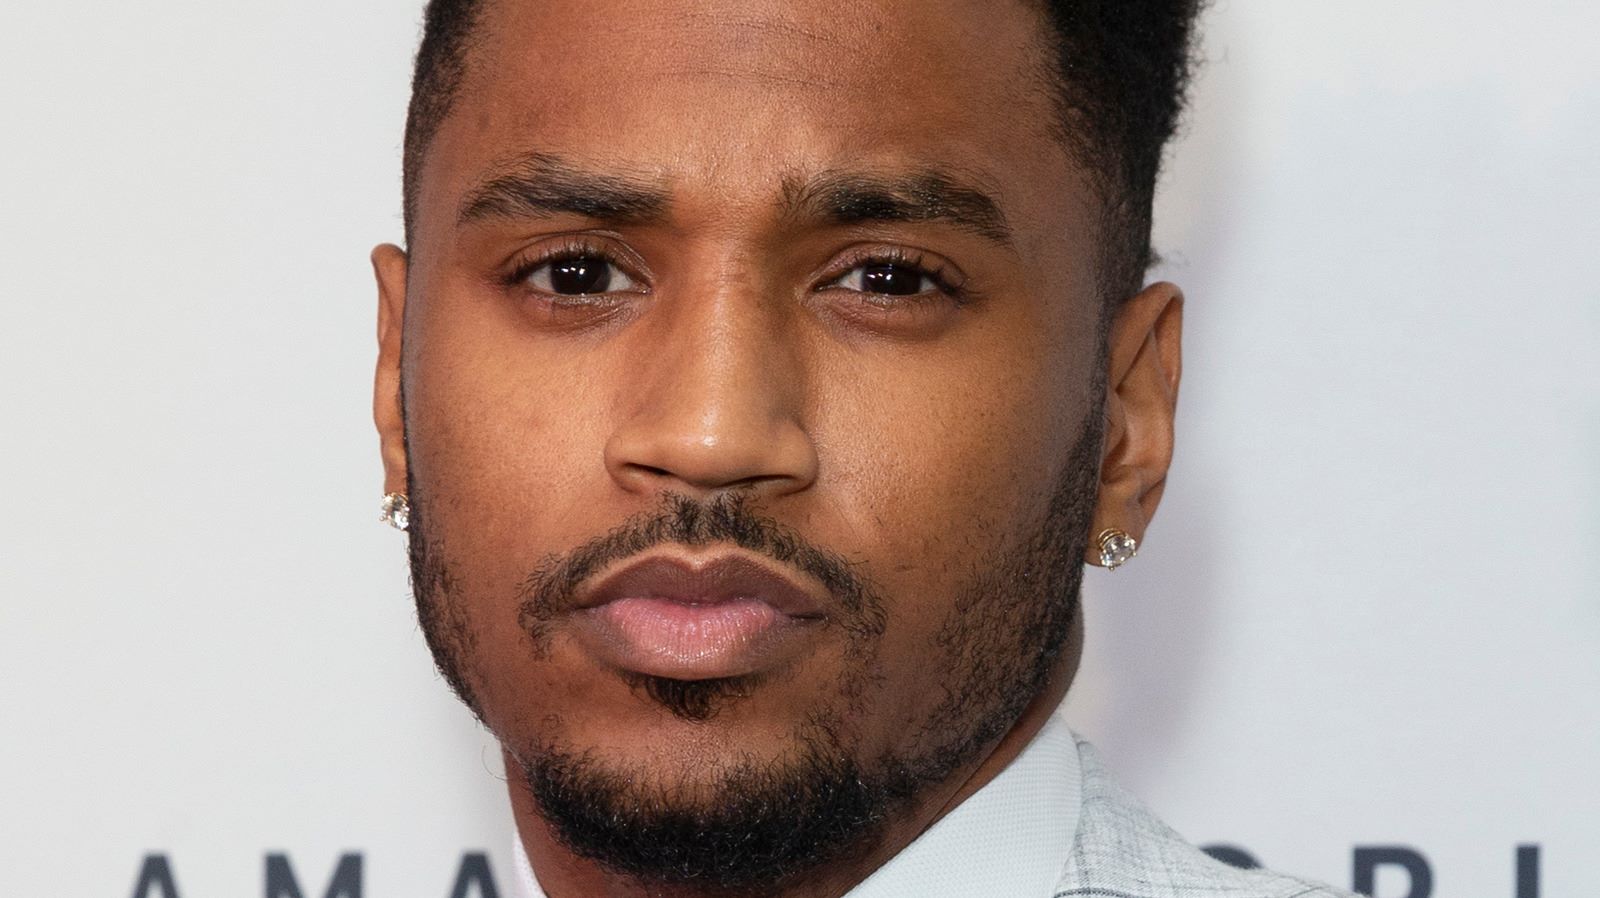 Trey Songz Facing Lawsuit For Alleged Sexual Assault At House Party